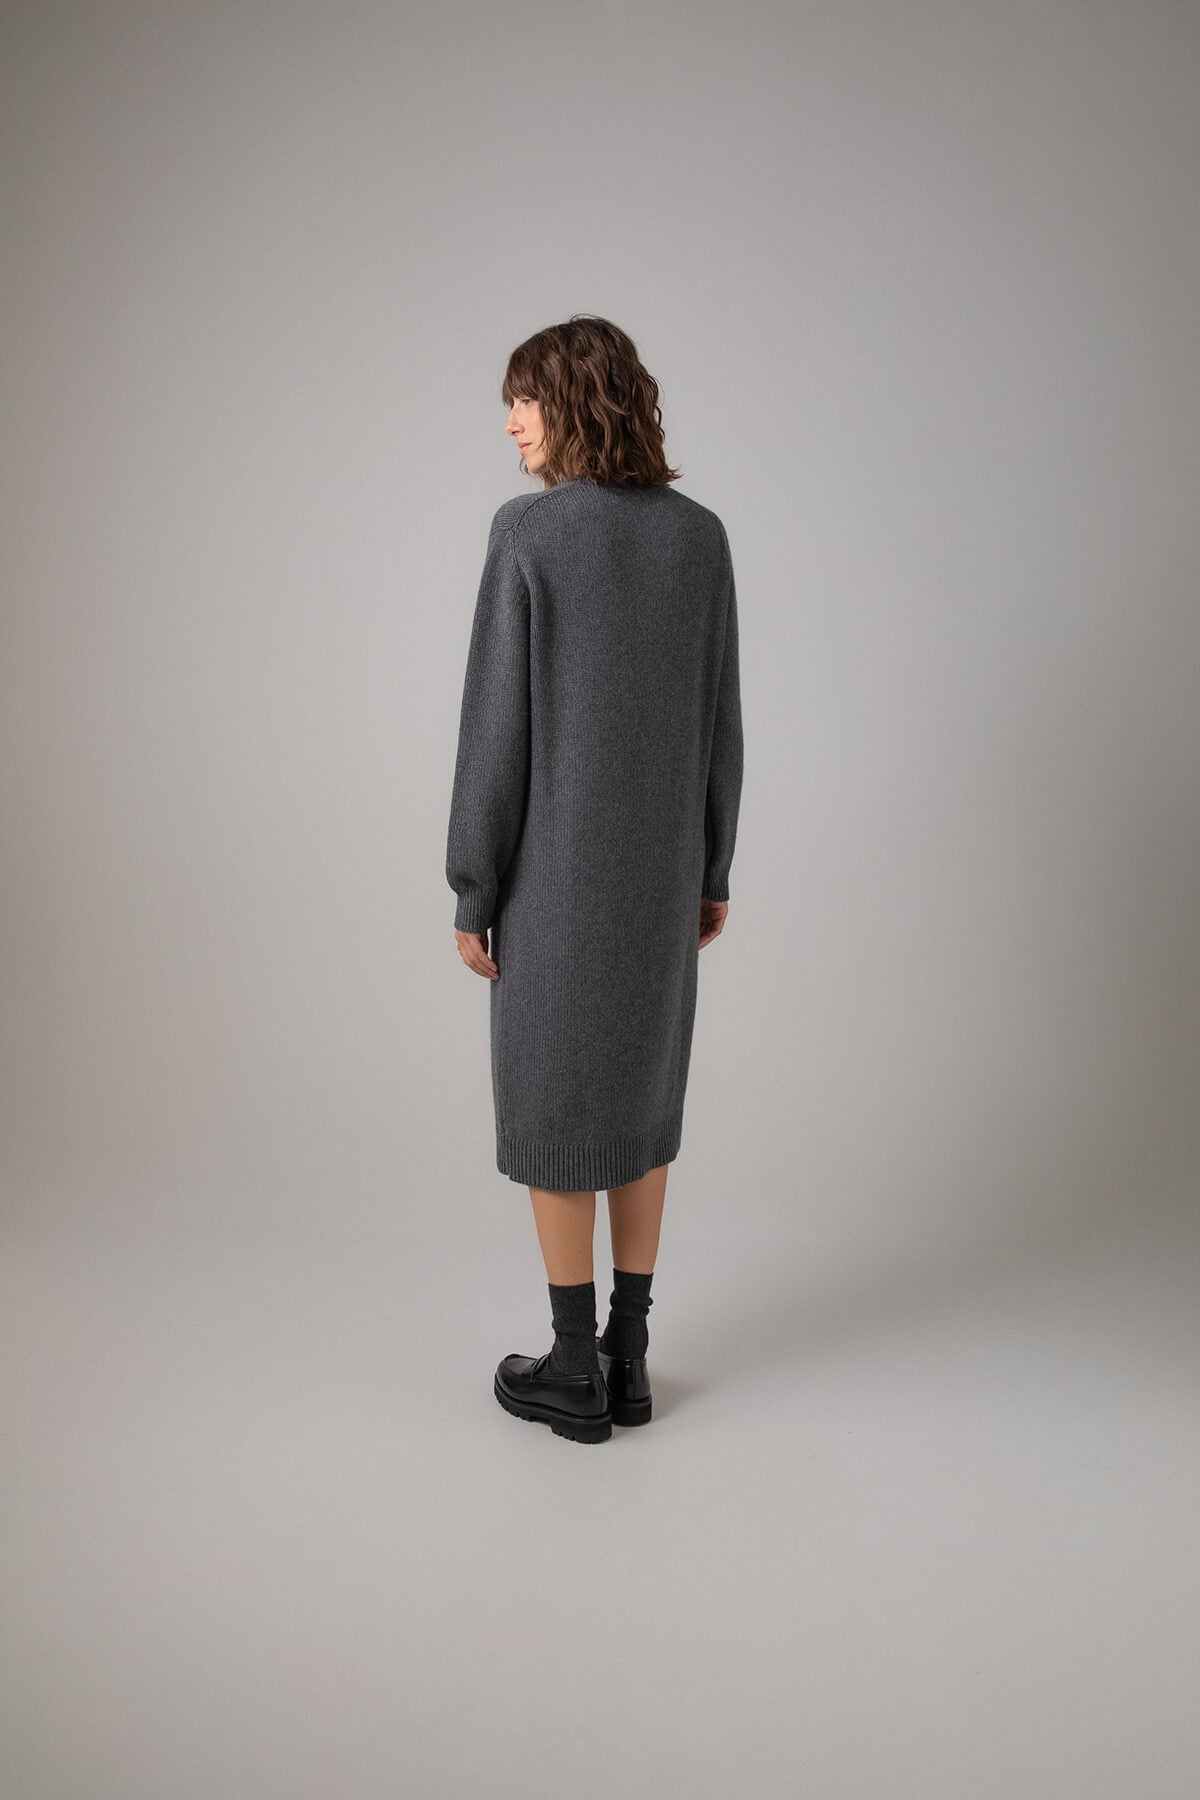 Back view of Johnstons of Elgin Crew Neck Cashmere Jumper Dress in Mid Grey on a grey background KAC05045HA4181